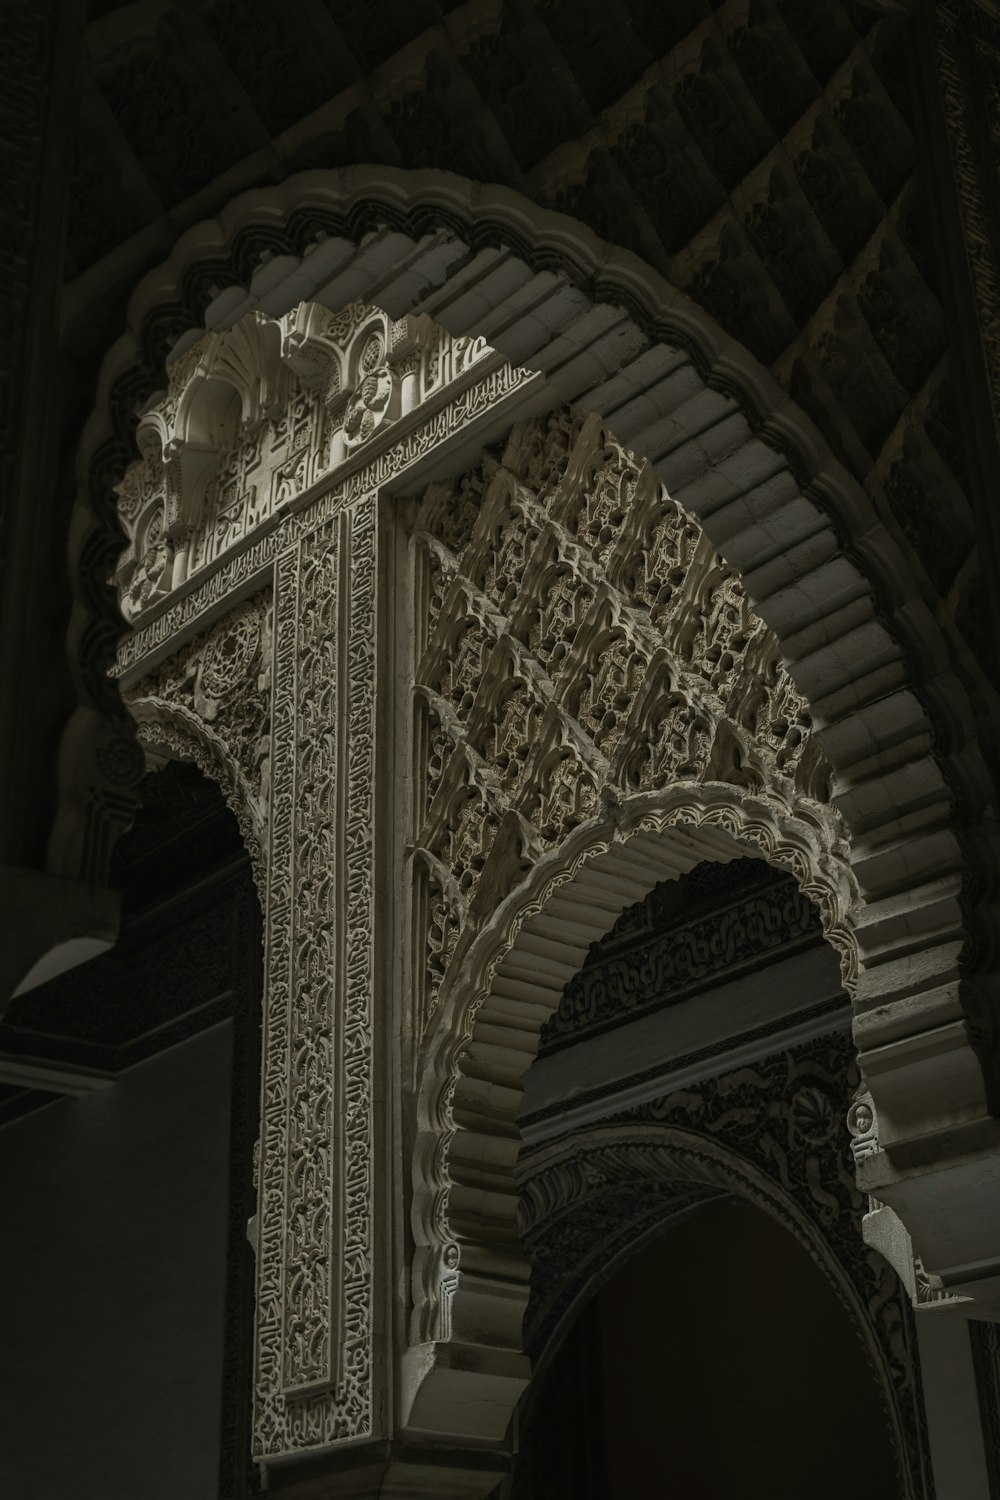 a large ornate ceiling